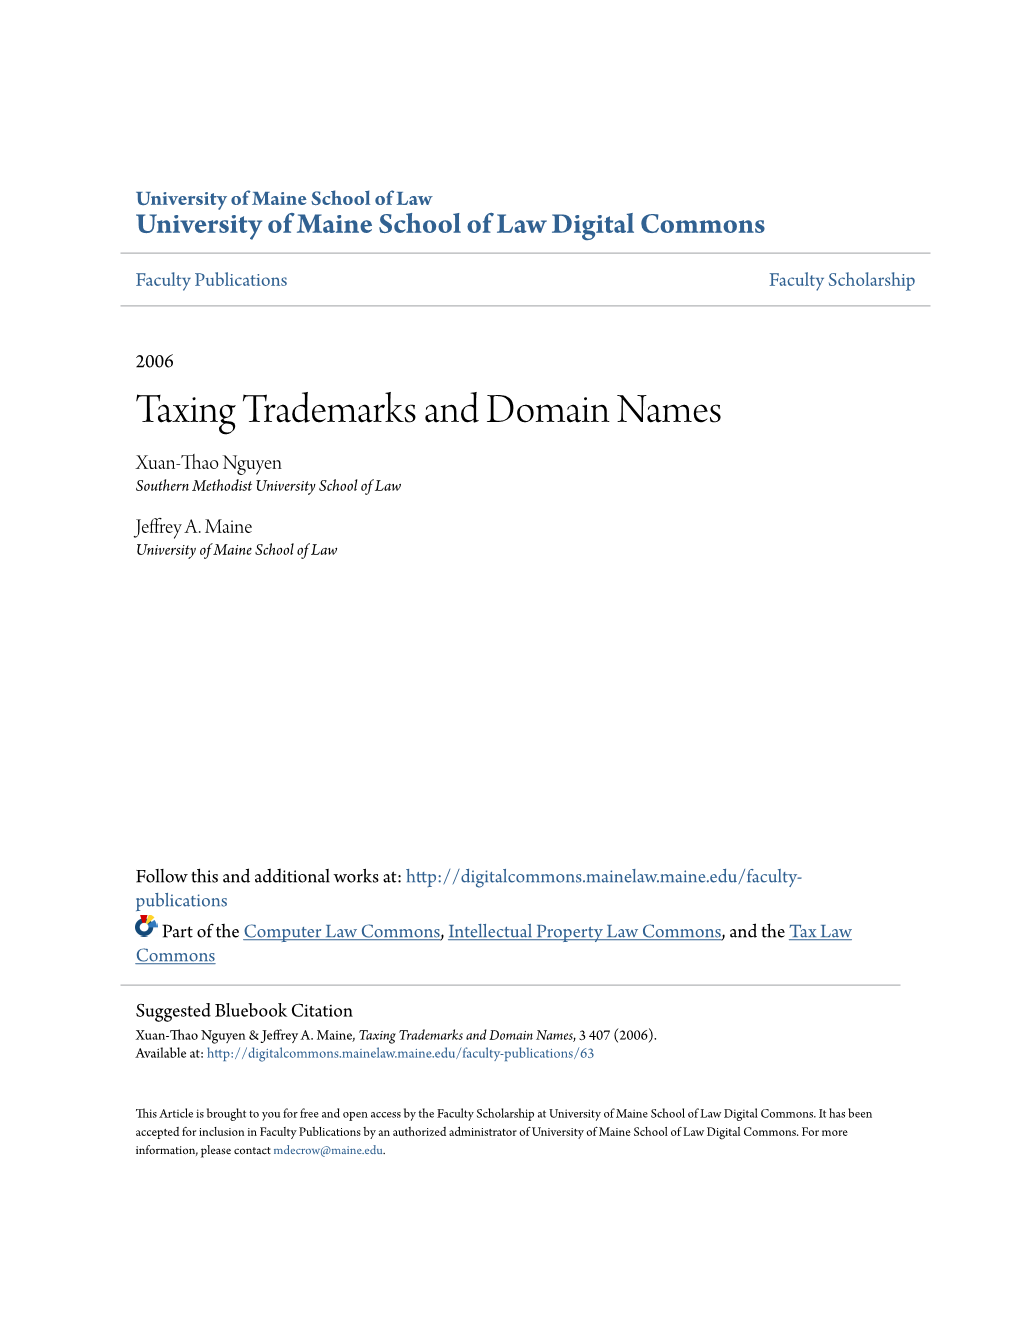 Taxing Trademarks and Domain Names Xuan-Thao Nguyen Southern Methodist University School of Law